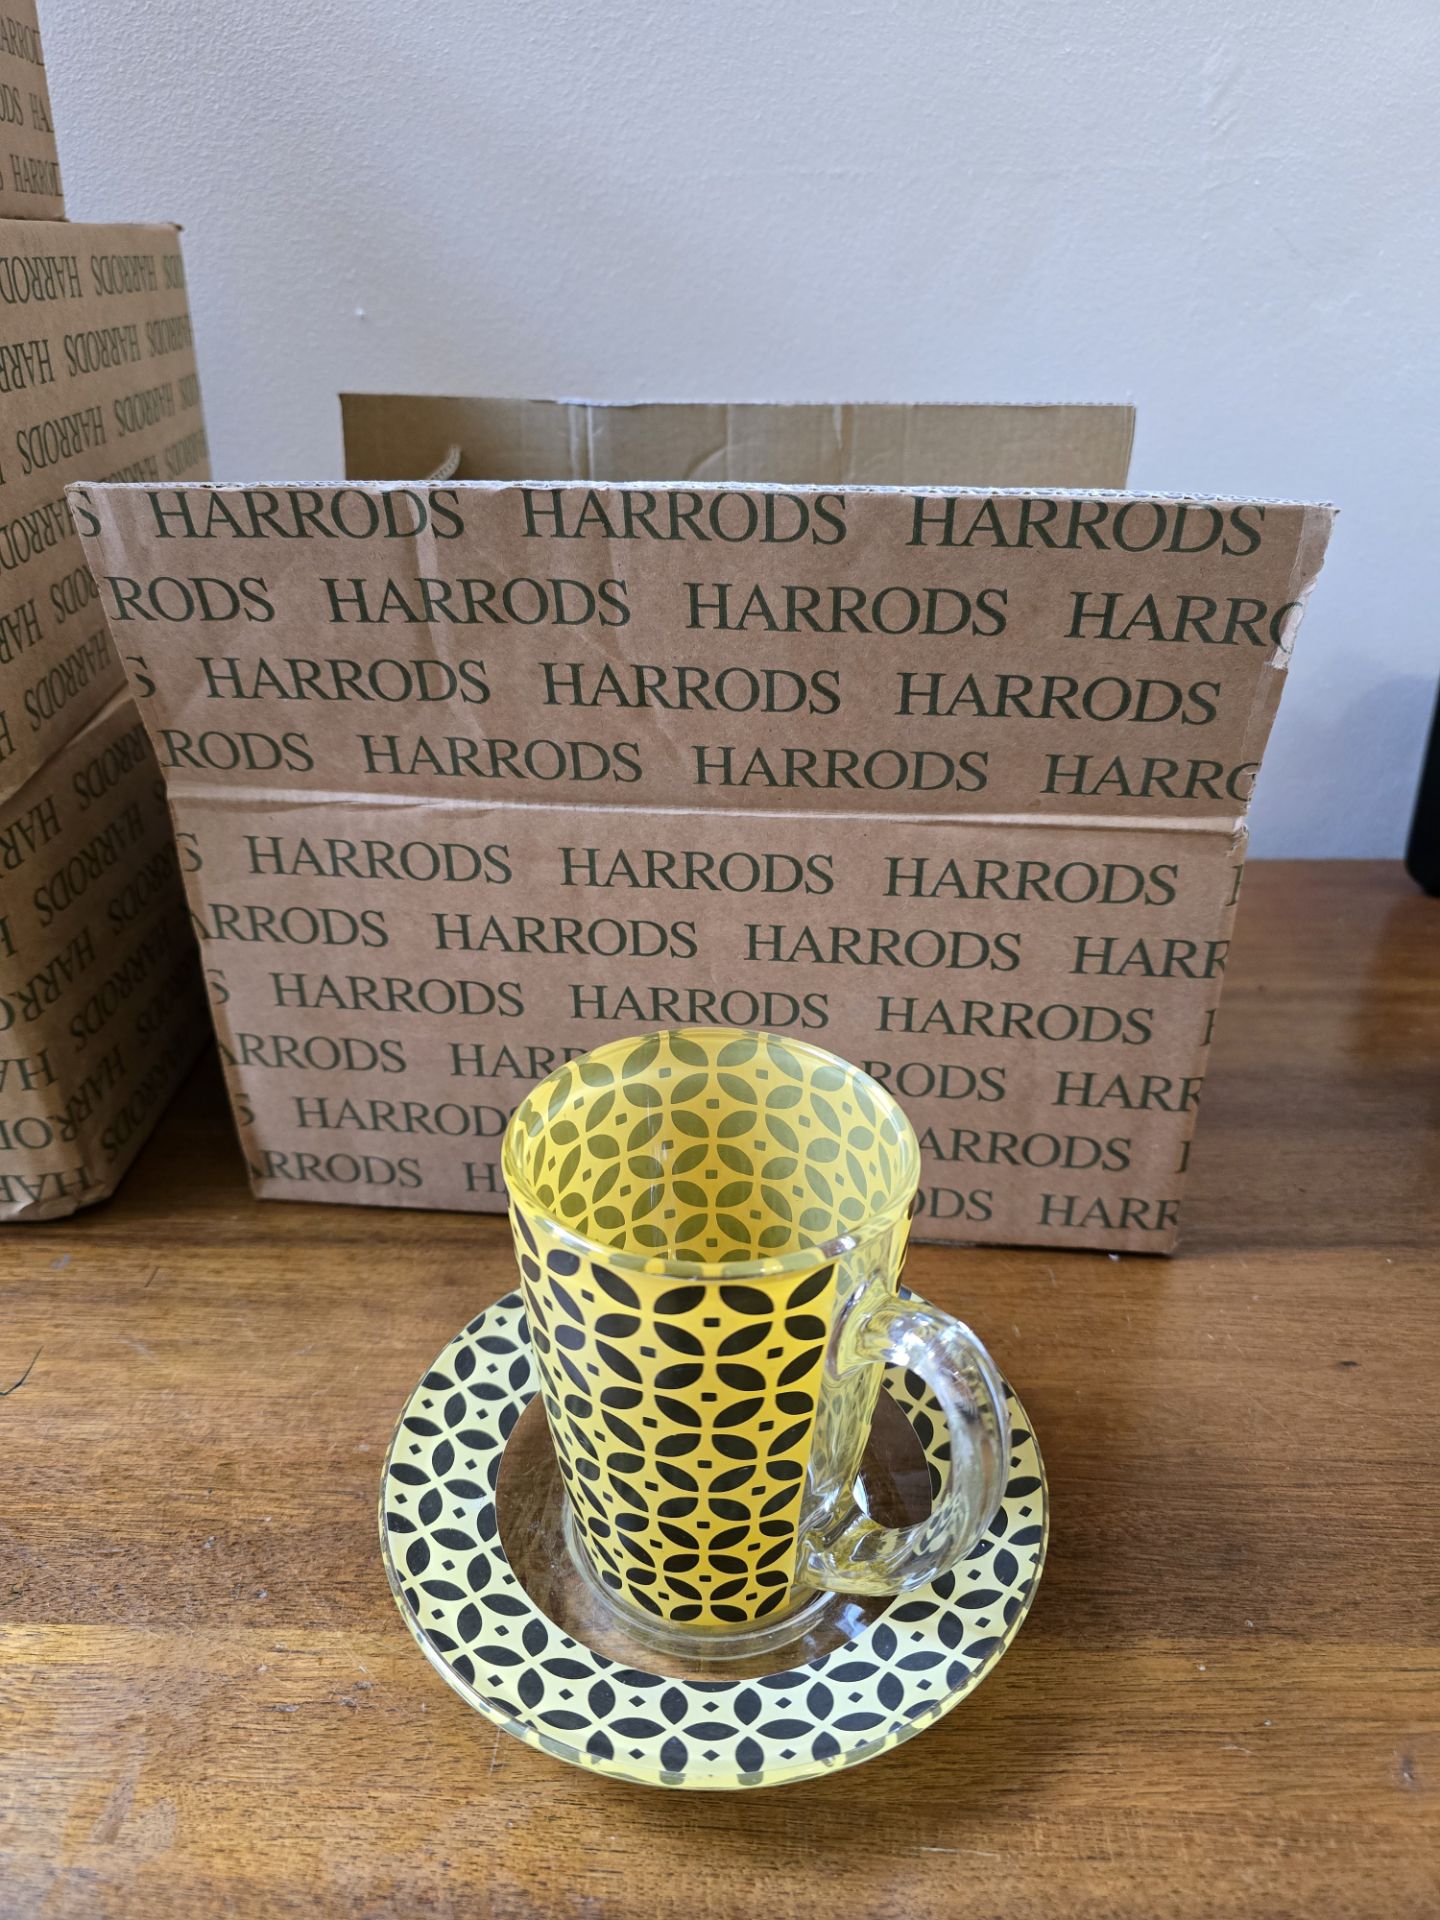 1 B Harrods Mezzah Cups 24 and Saucers 24 - Image 4 of 6